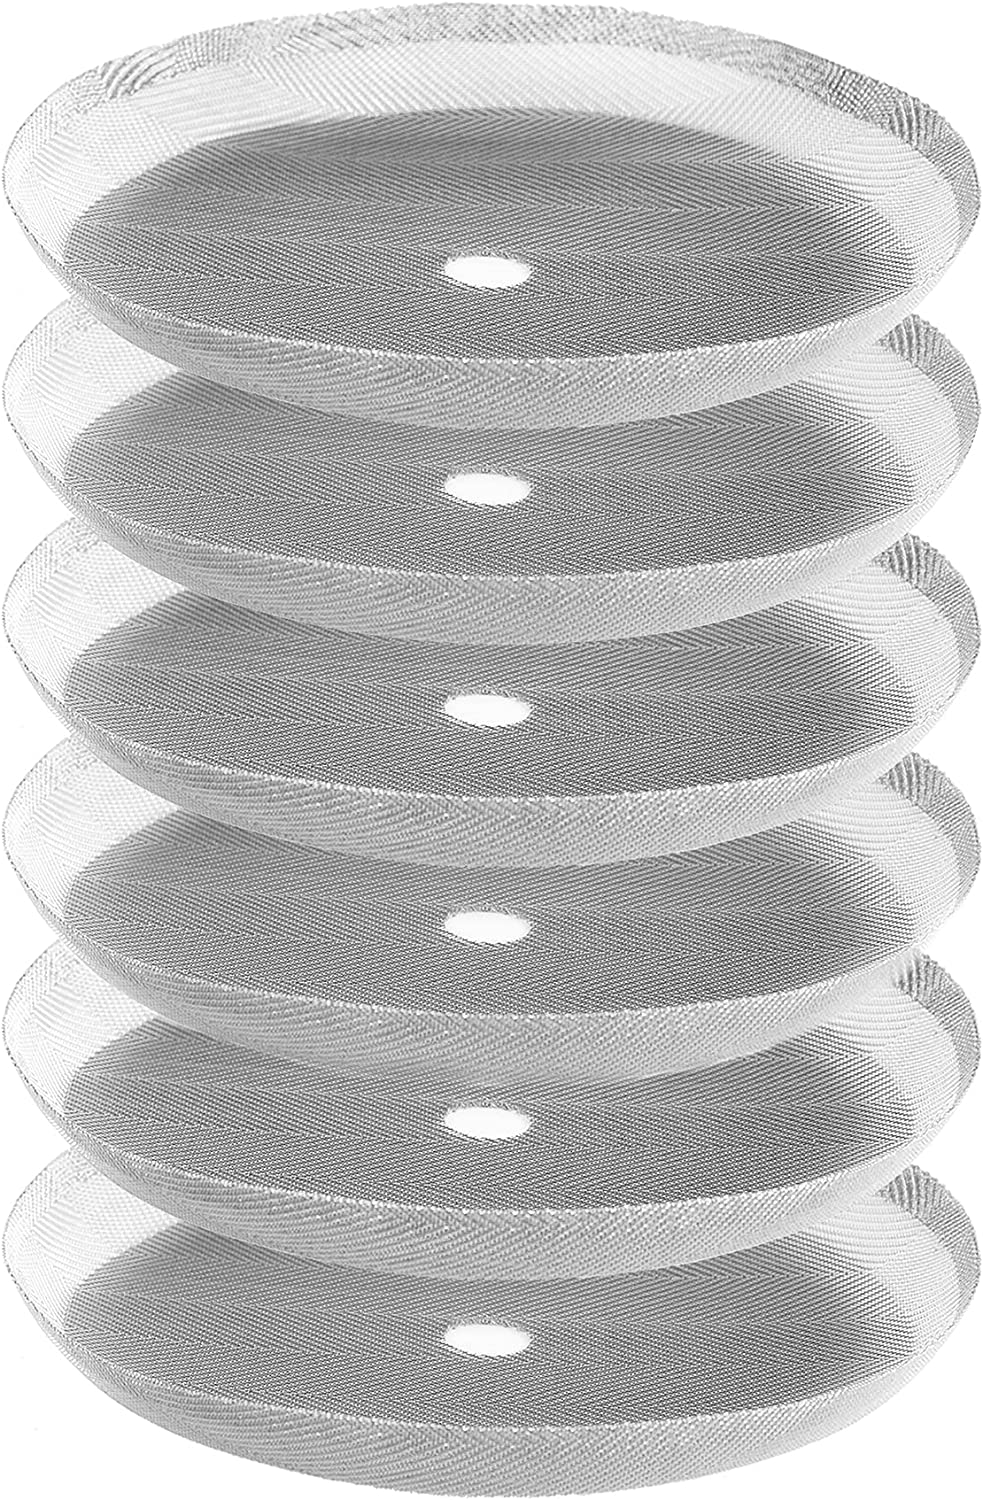 MaxMiuly French Press Strainer for Coffee Press Replacement Filter Sieve for 350 ml / 0.35 L / 3 Cups French Press Coffee Machines, Stainless Steel Mesh Replacement Pack of 6